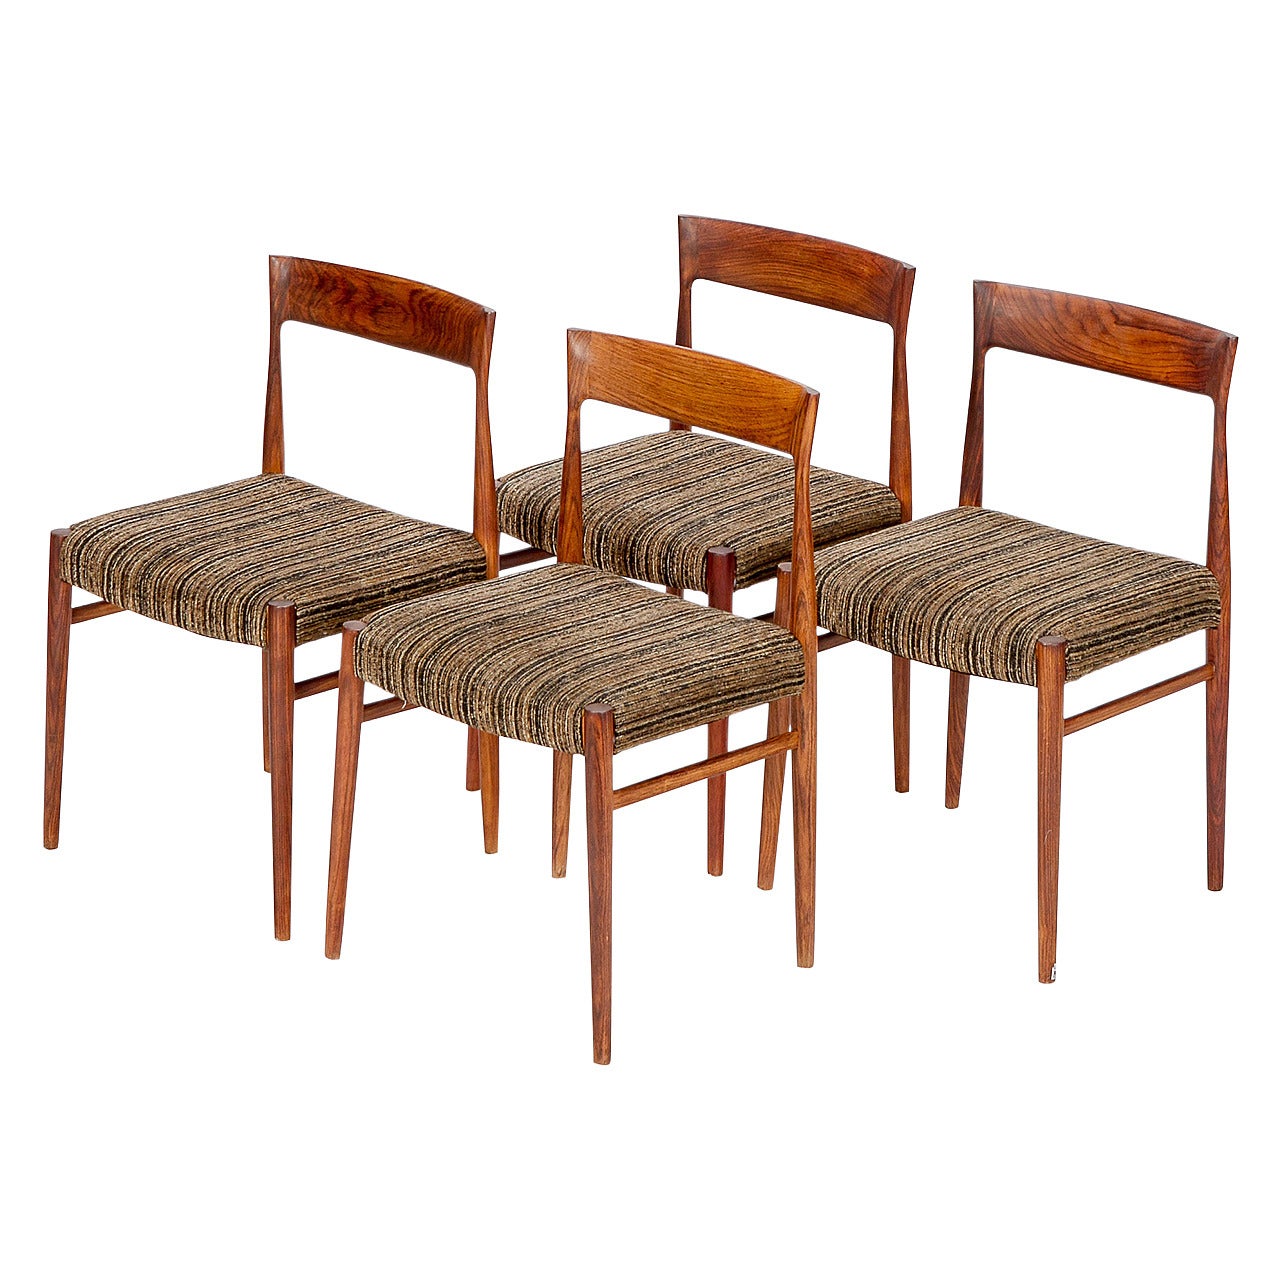 Set of Four Danish Rosewood Chairs, 1960s For Sale